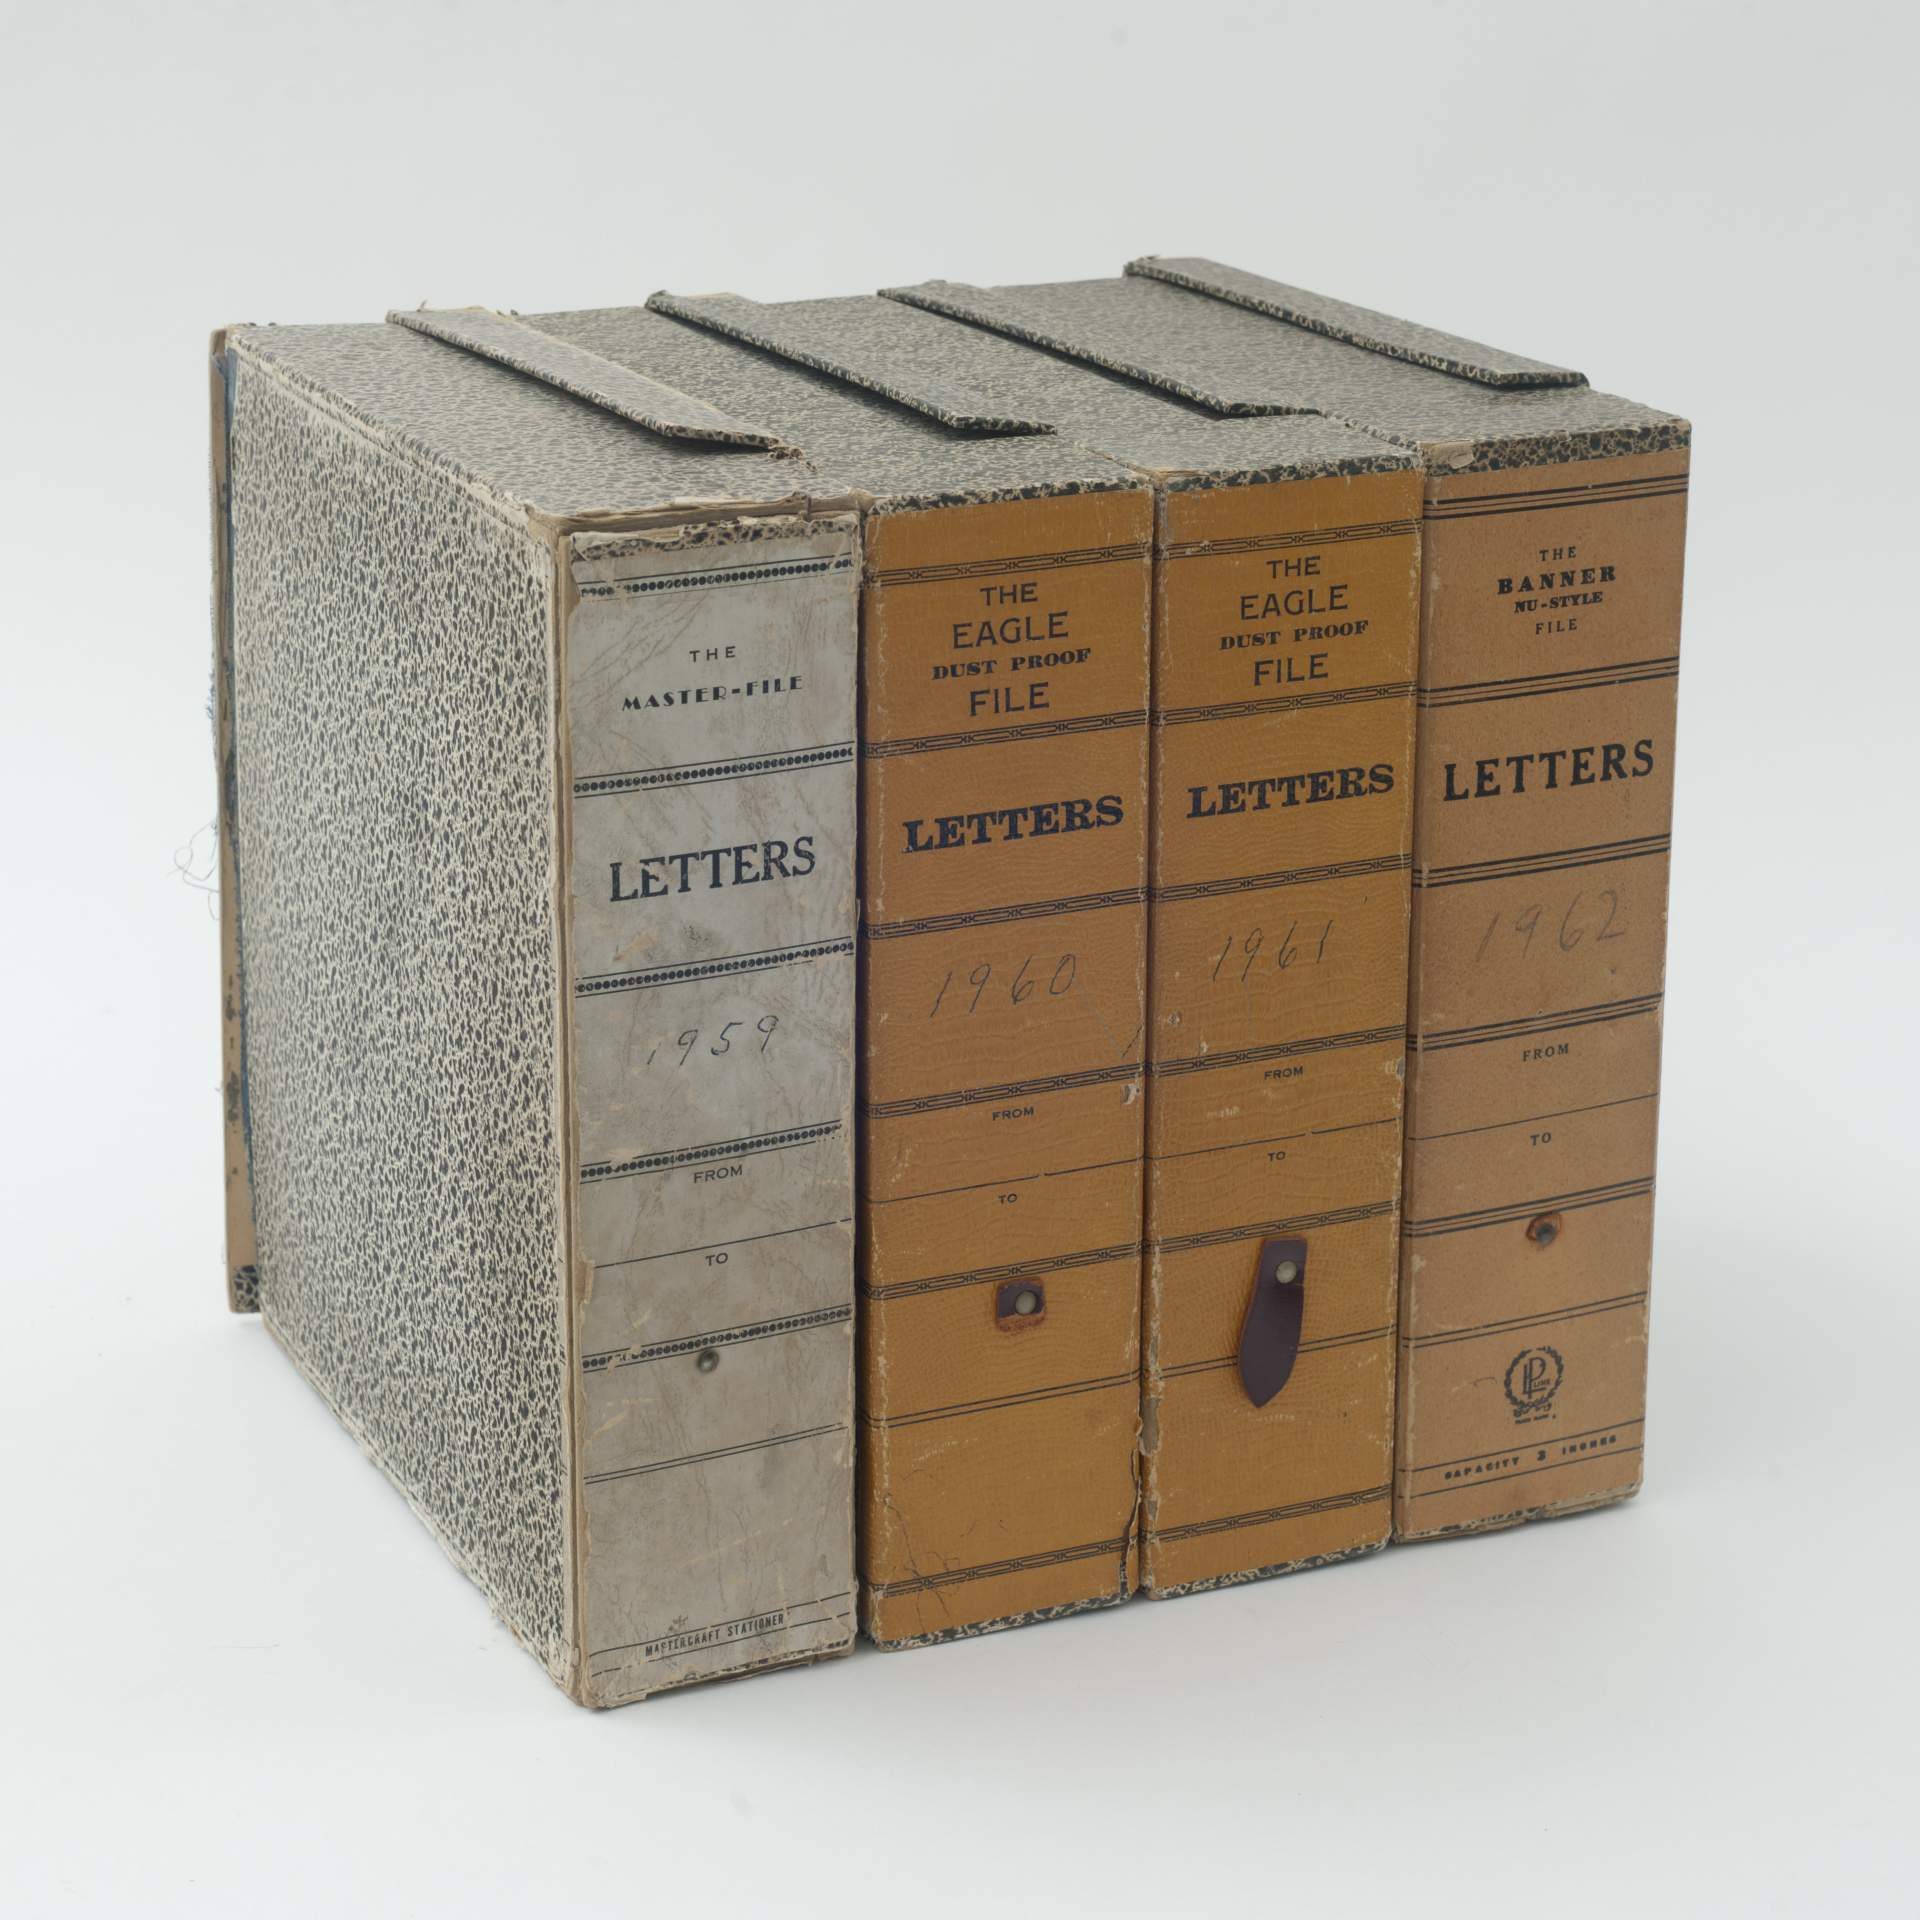 Original Letter Boxes of the Rehn Archive